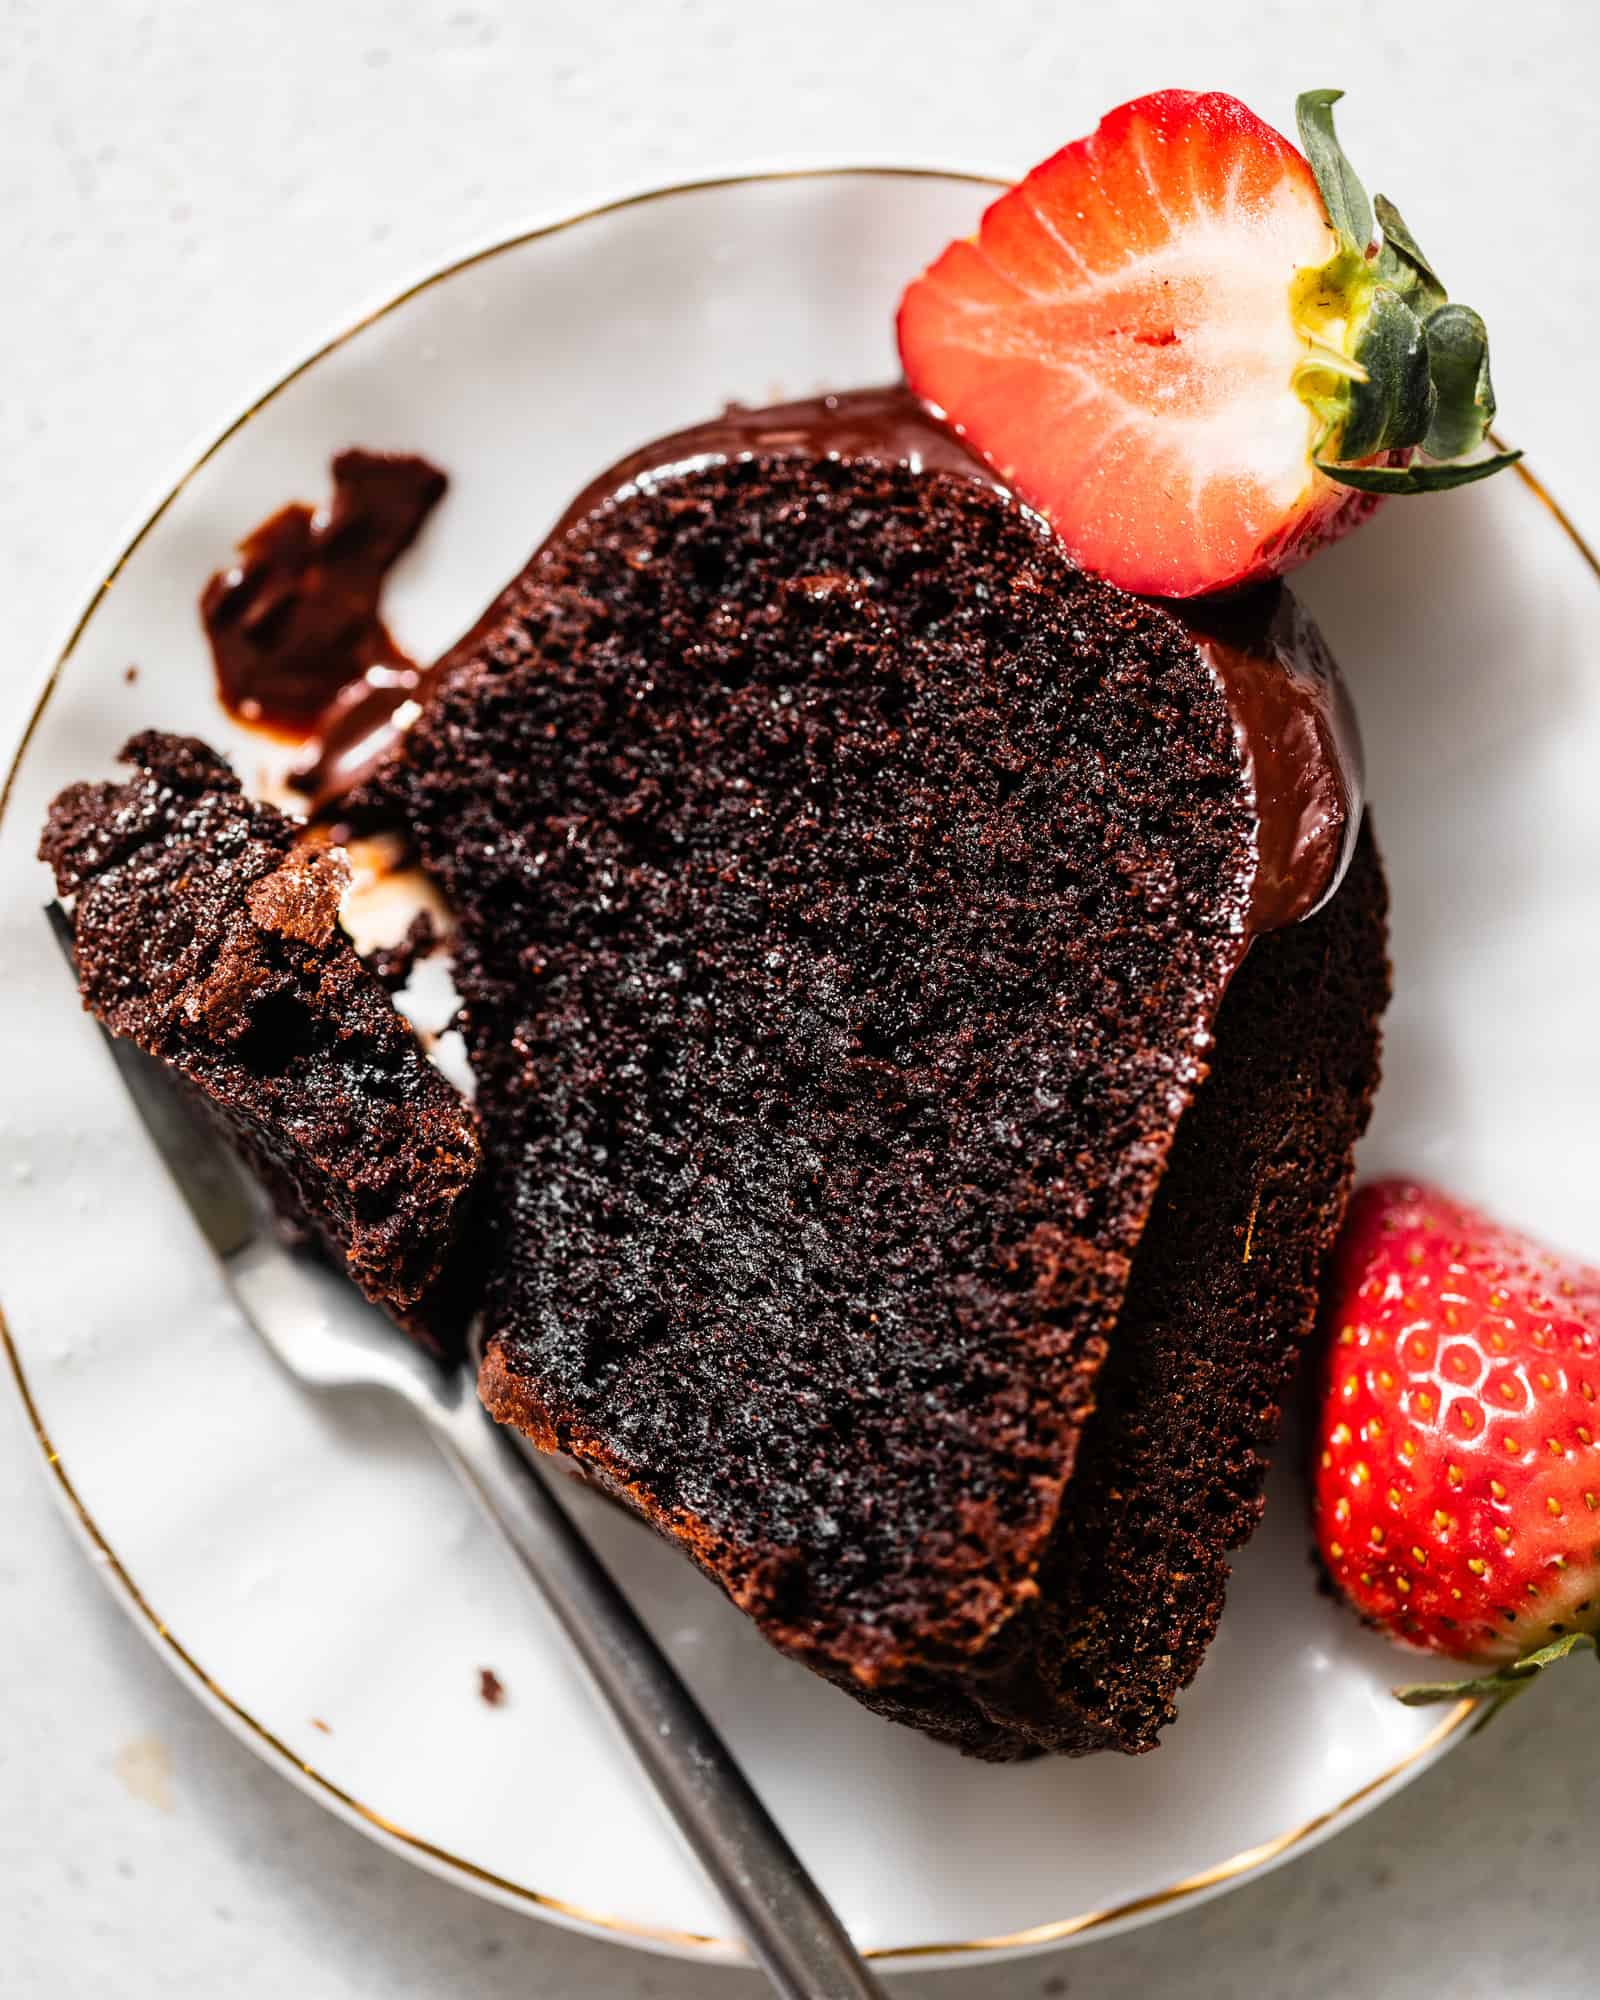 a slice of chocolate pound cake on a plate with a strawberry and a fork